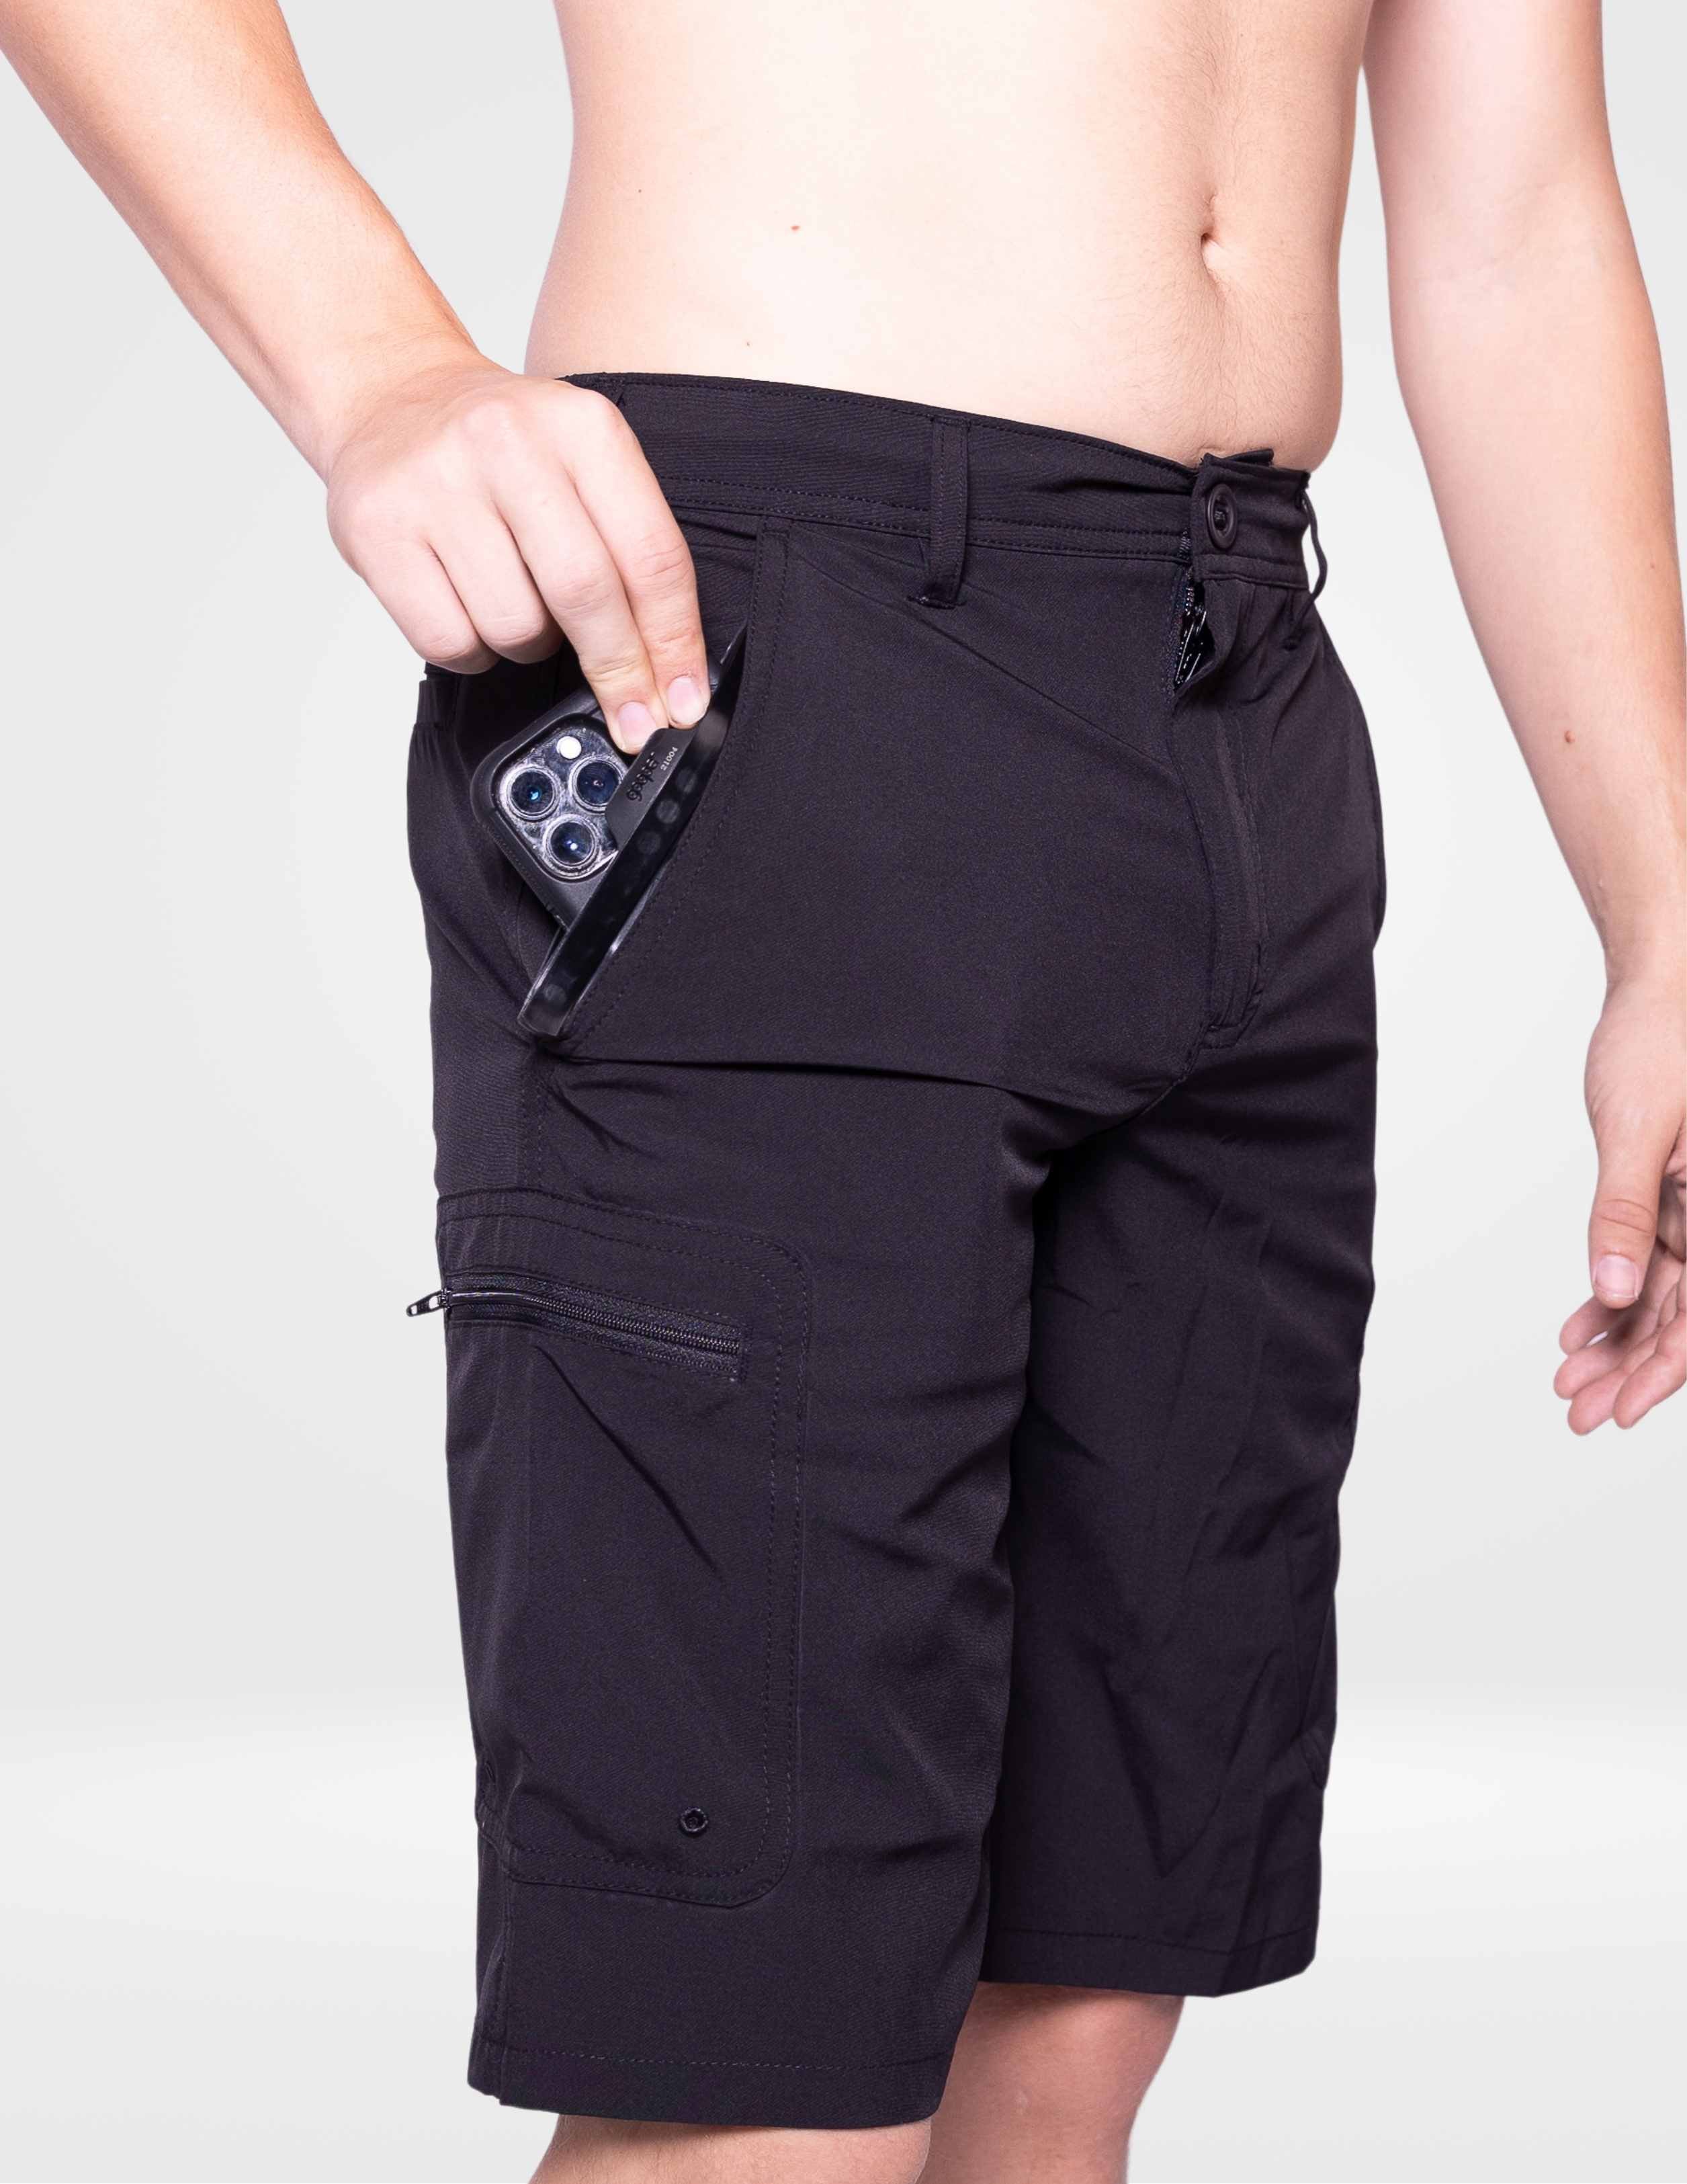 Sea Chaser Waterproof Quick Dry Shorts With A Waterproof Pocket 10 Inseam